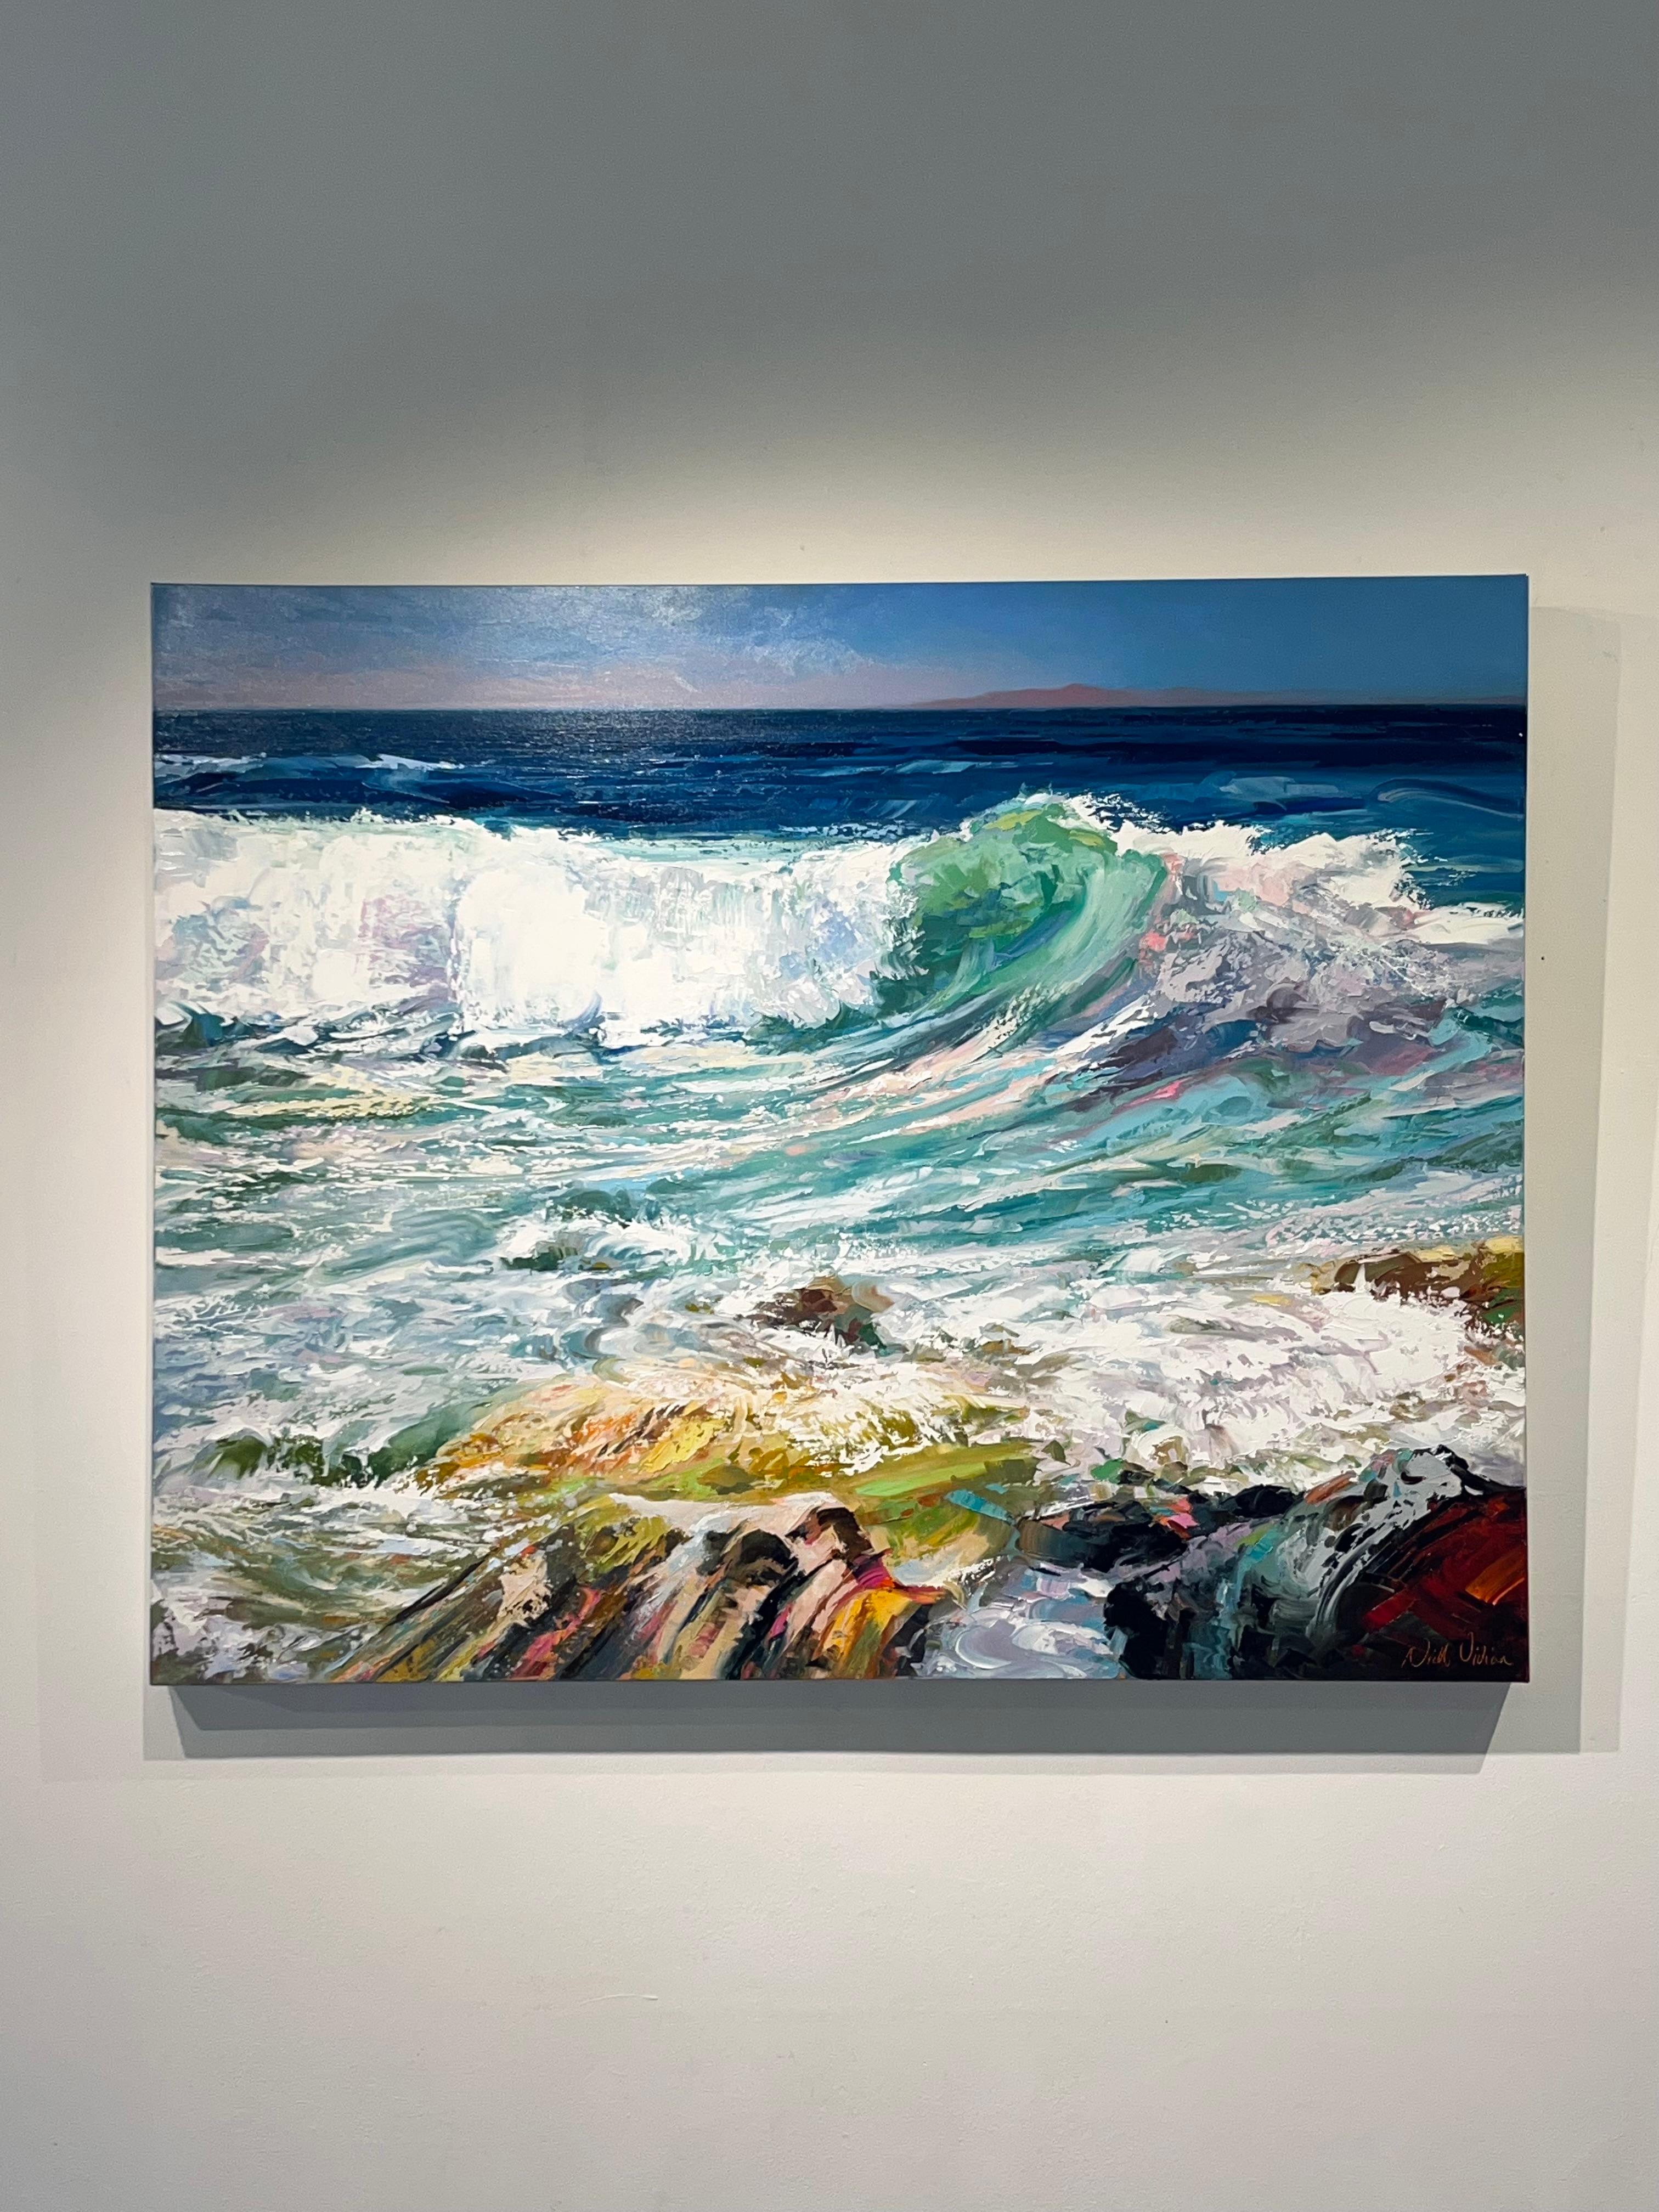 Breaking Wave - modern art expressionist seascape vivid colour waterscape - Abstract Impressionist Painting by Nicholas Vivian